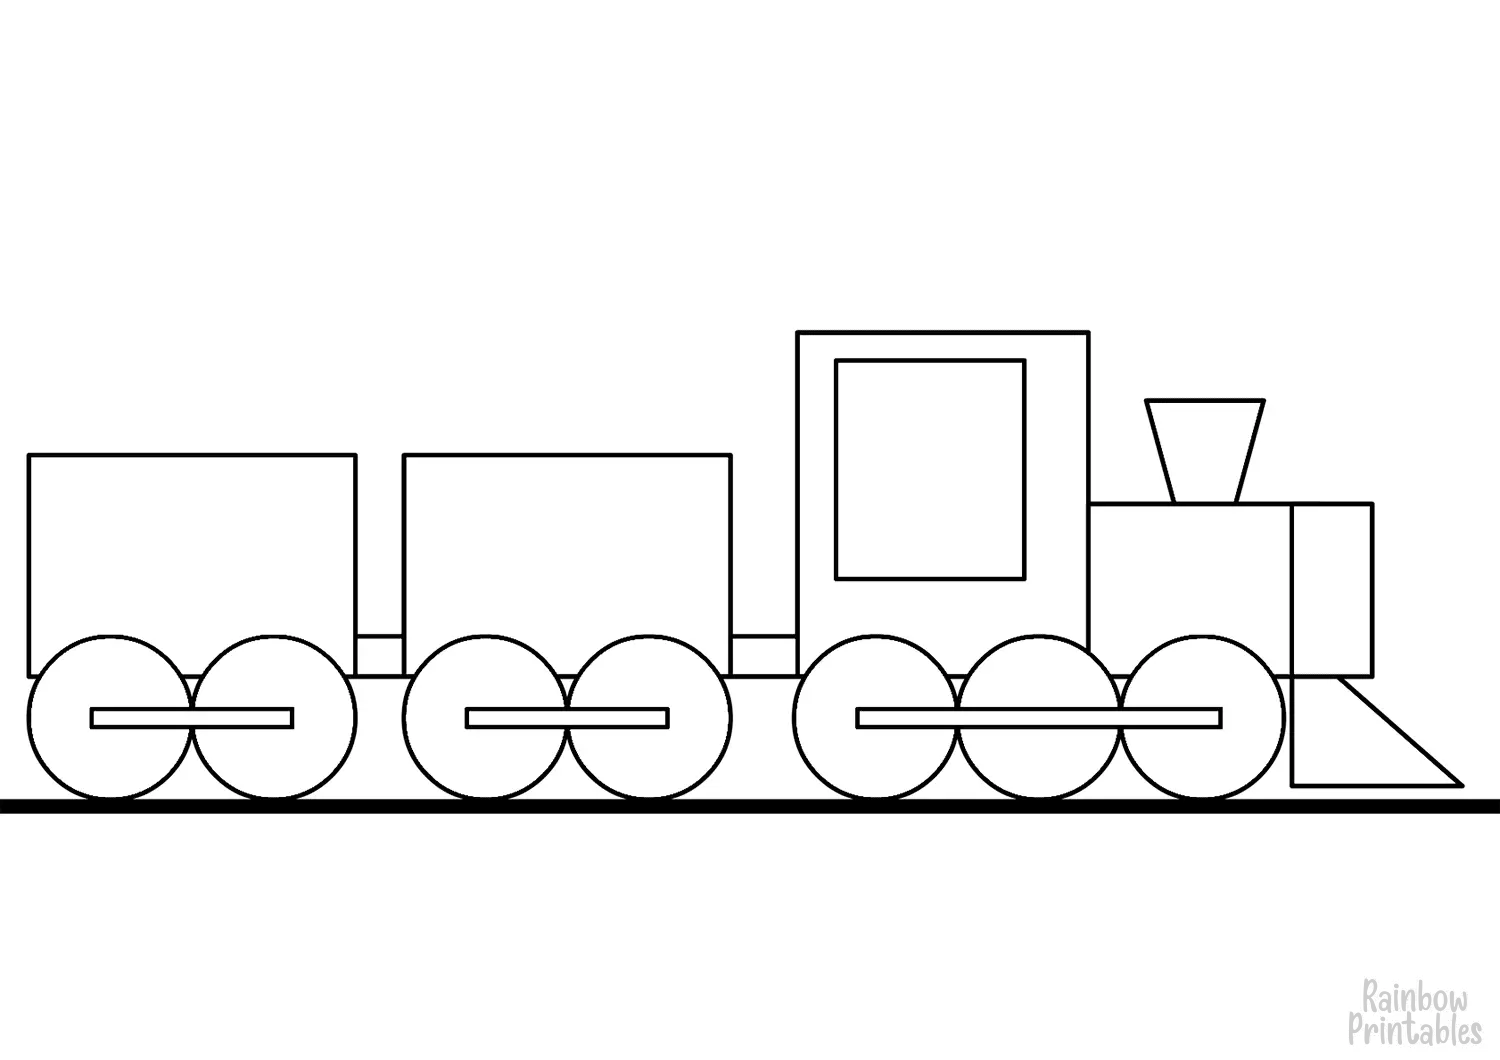 CARTOON TRAIN Clipart Coloring Pages for Kids Adults Art Activities Line Art